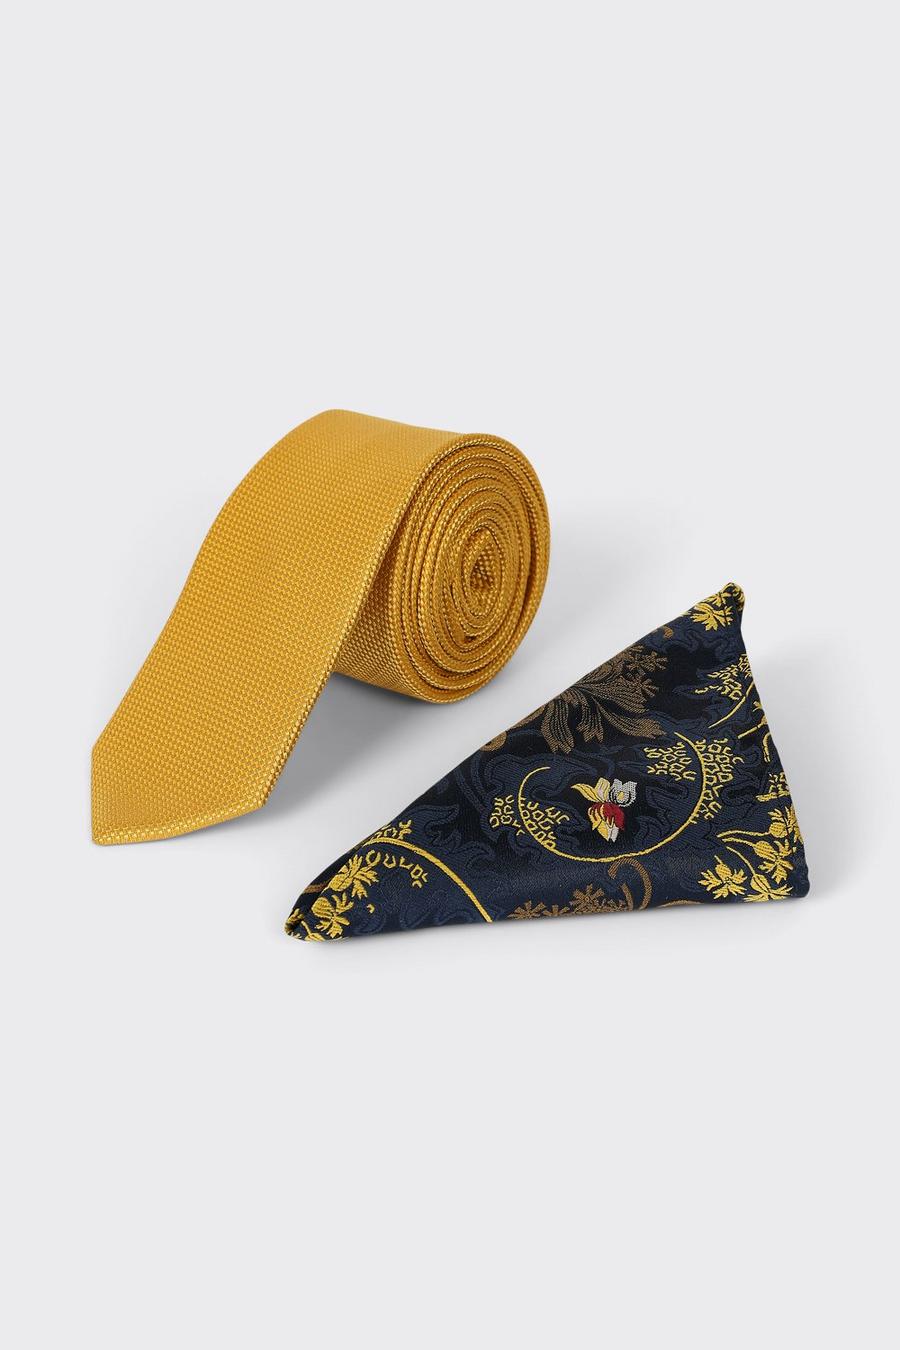 Mustard Tie With Blue Floral Pocket Square